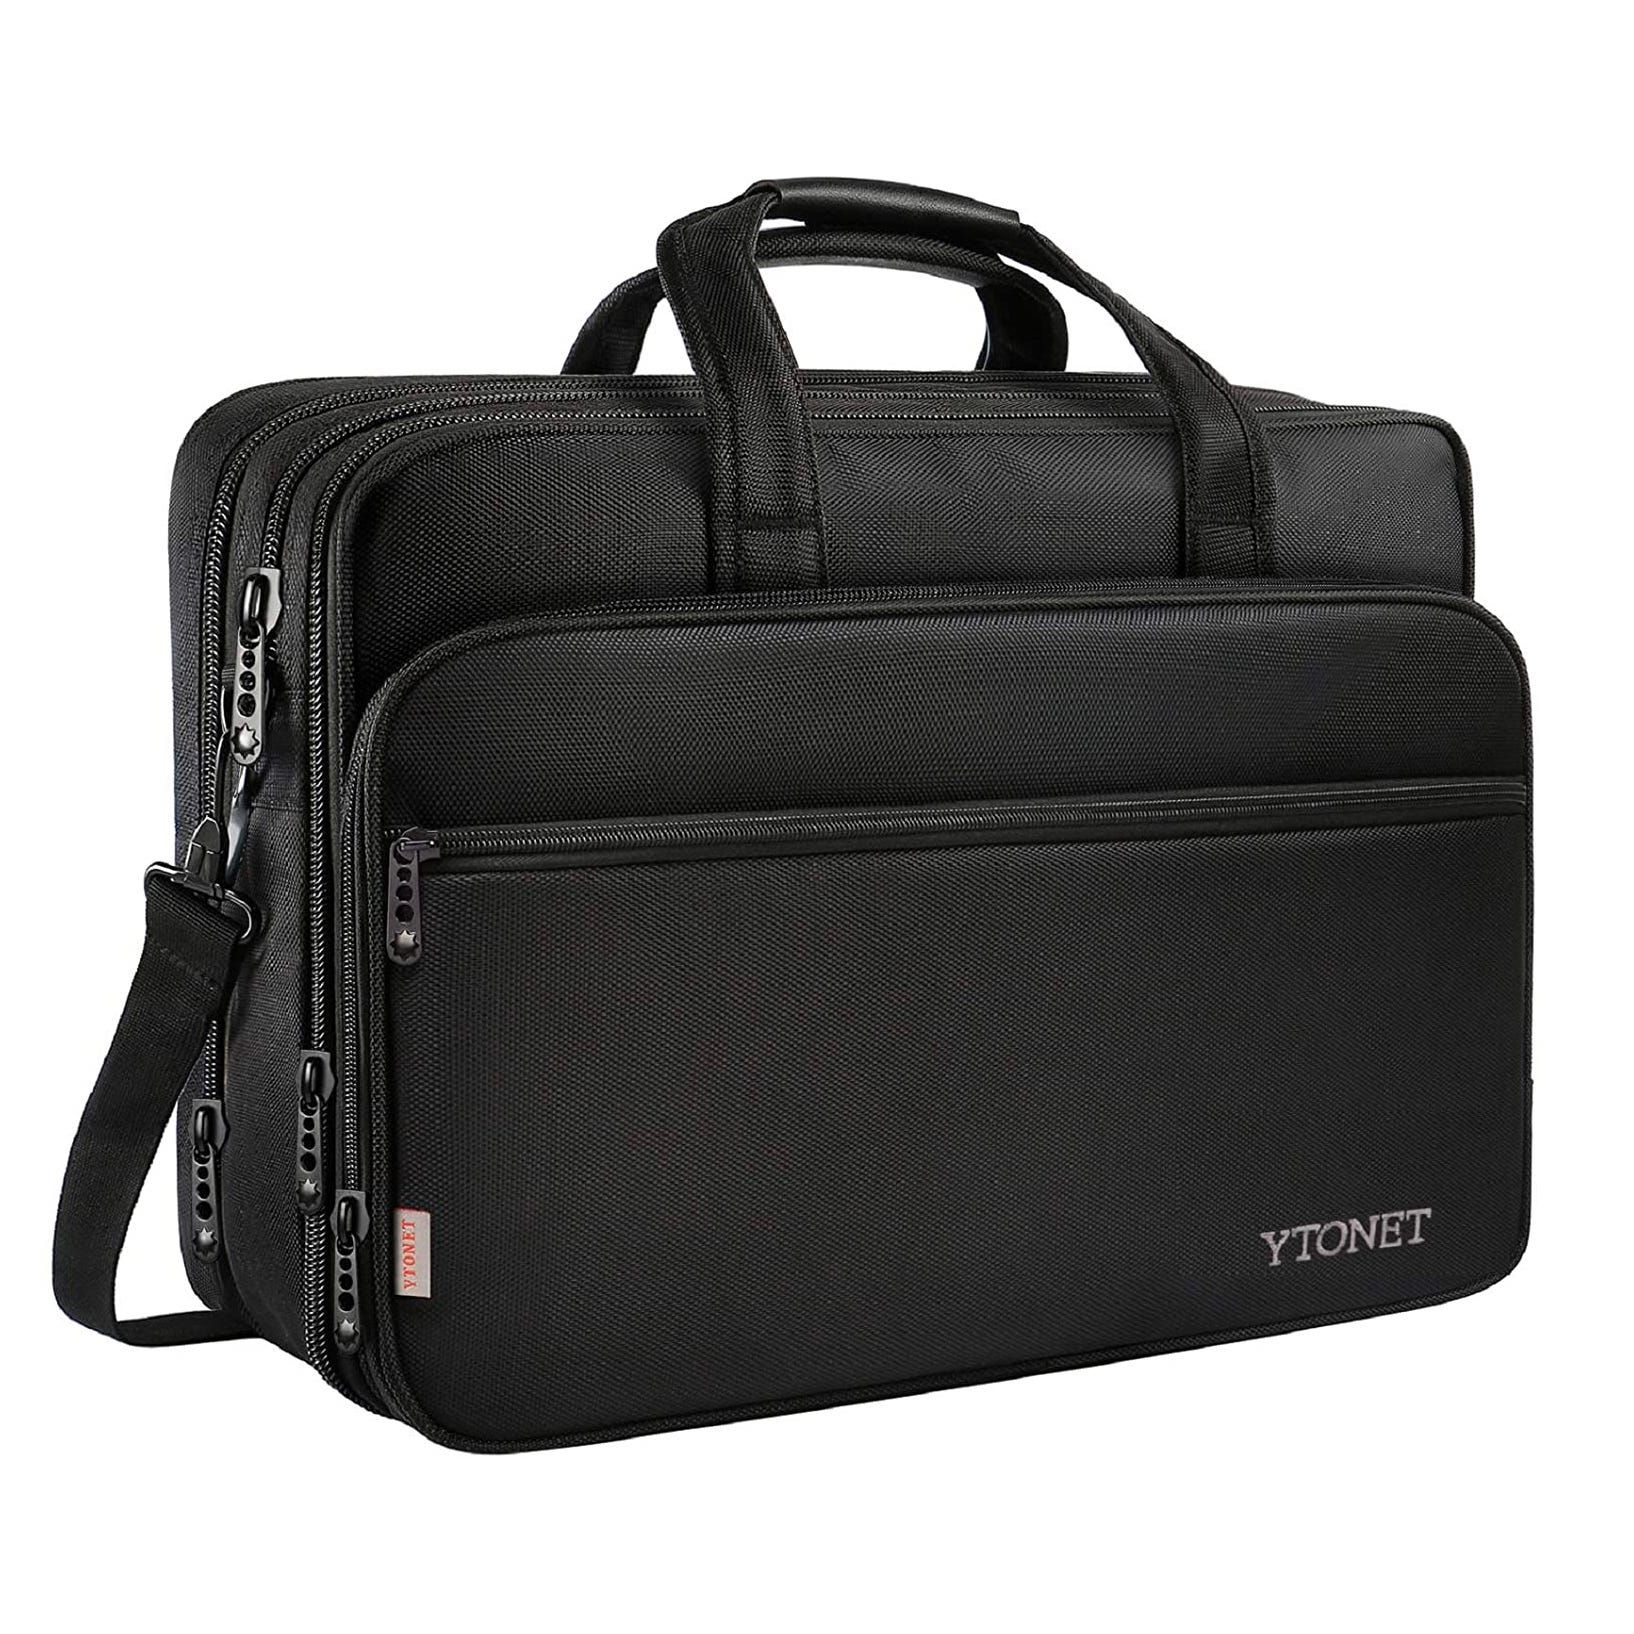 The 15 Best Briefcases for Men to Buy in 2023 - Top Briefcases